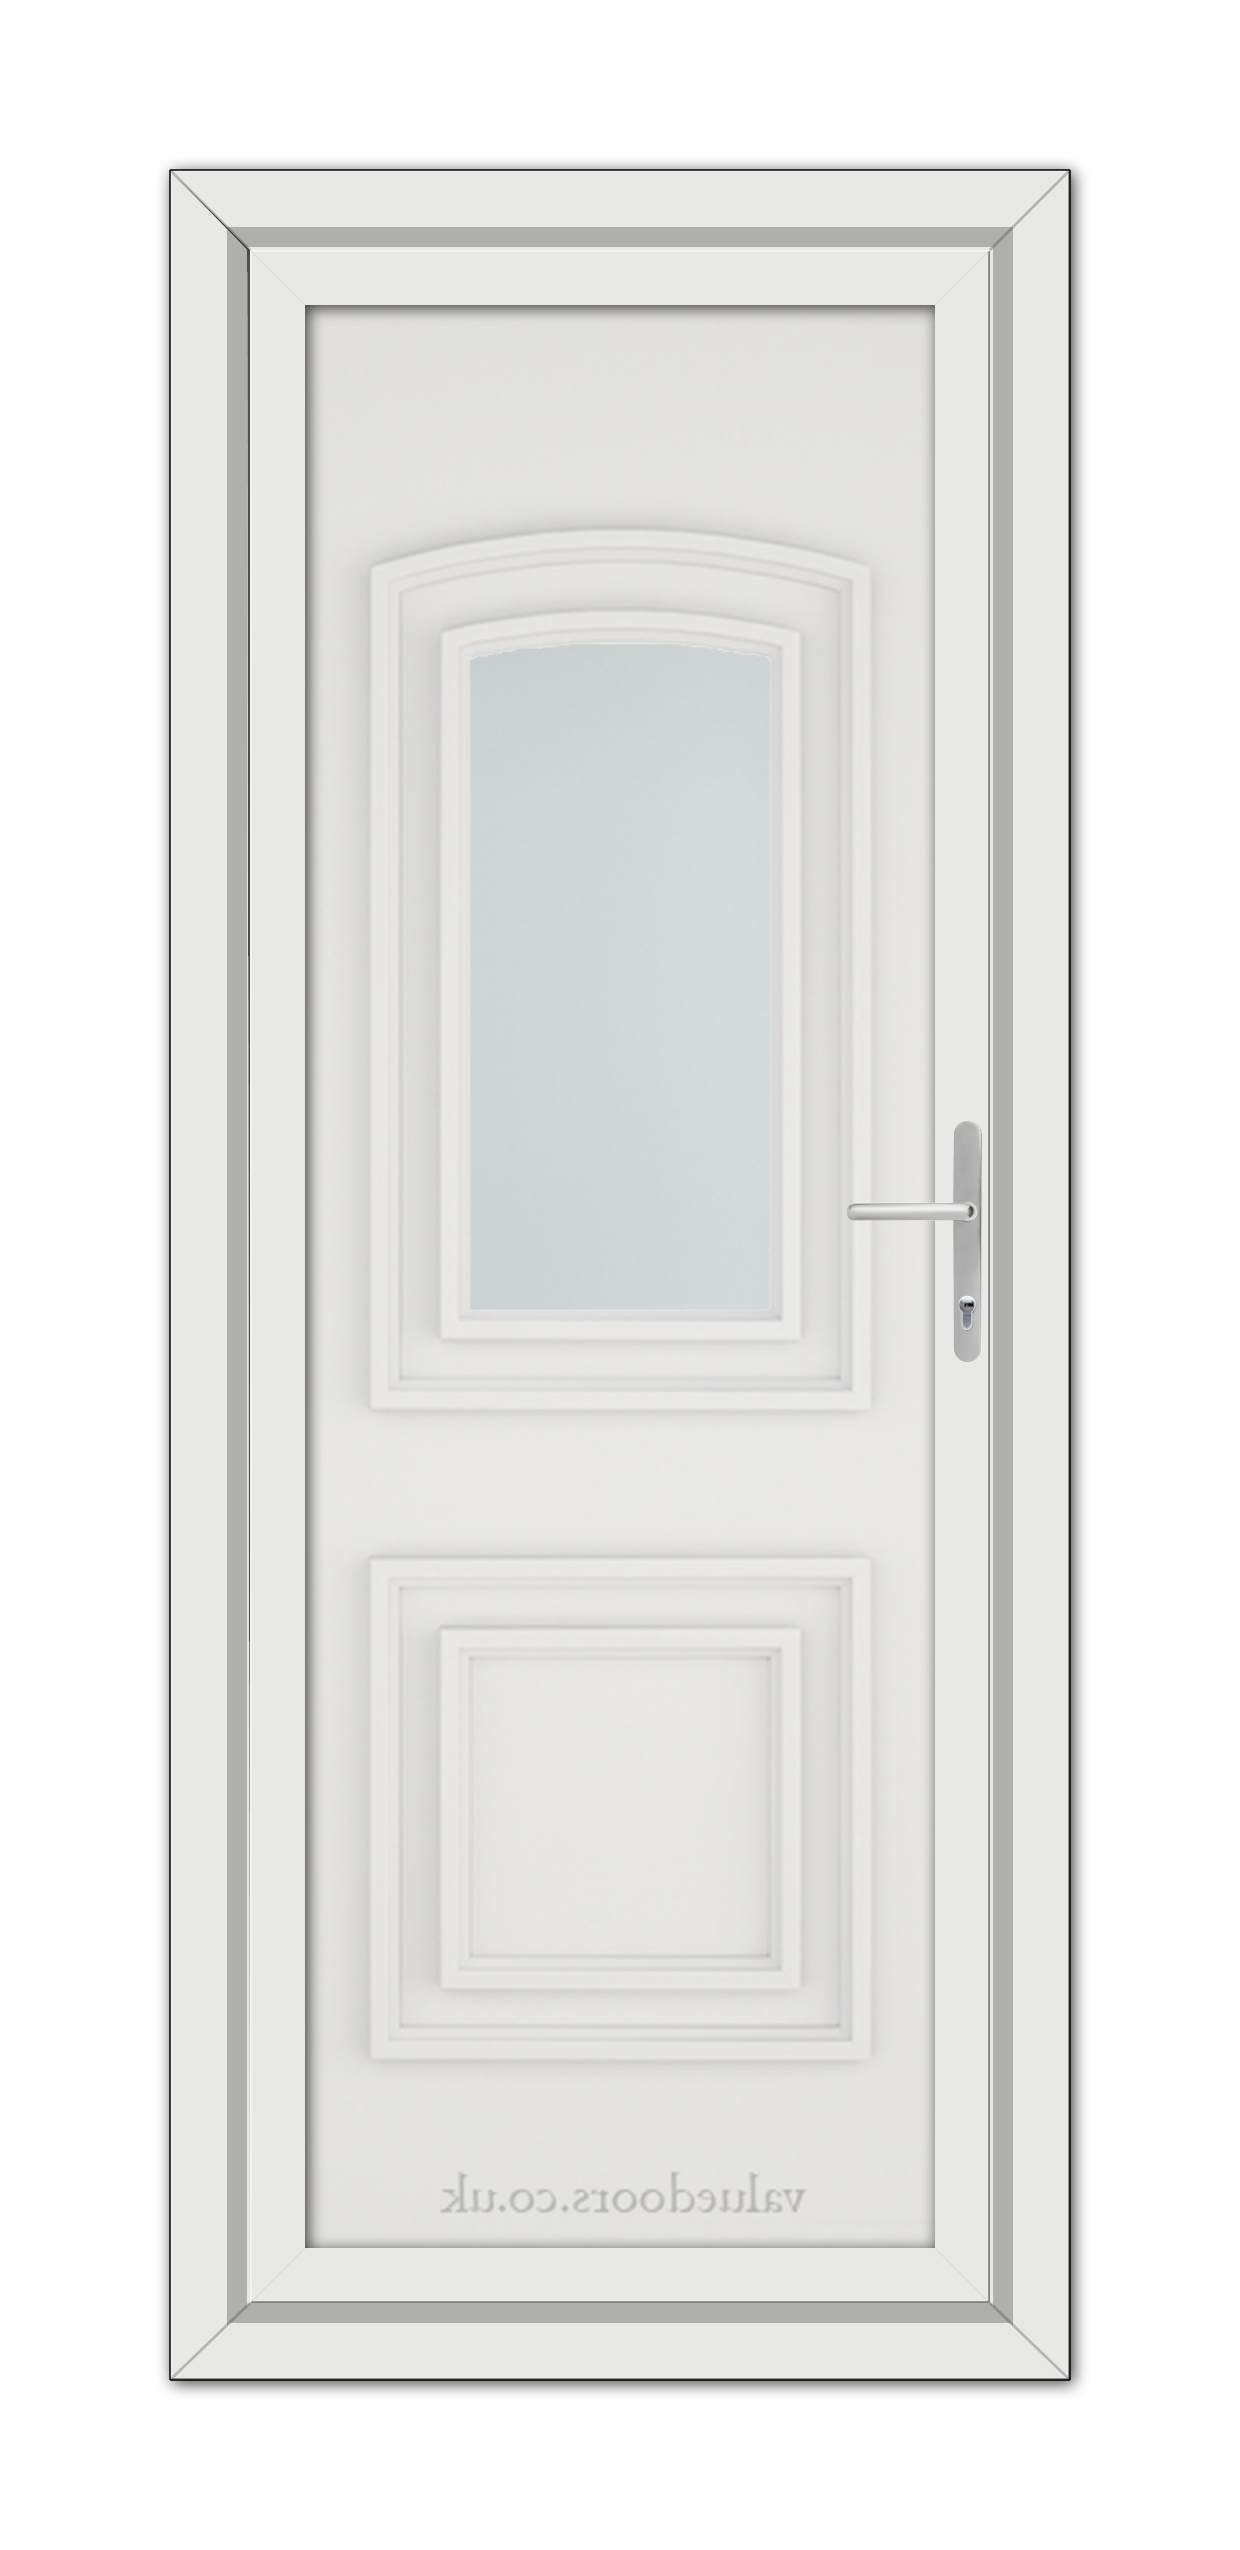 A White Balmoral One uPVC Door with a vertical frosted glass panel and a silver handle, set in a simple frame.